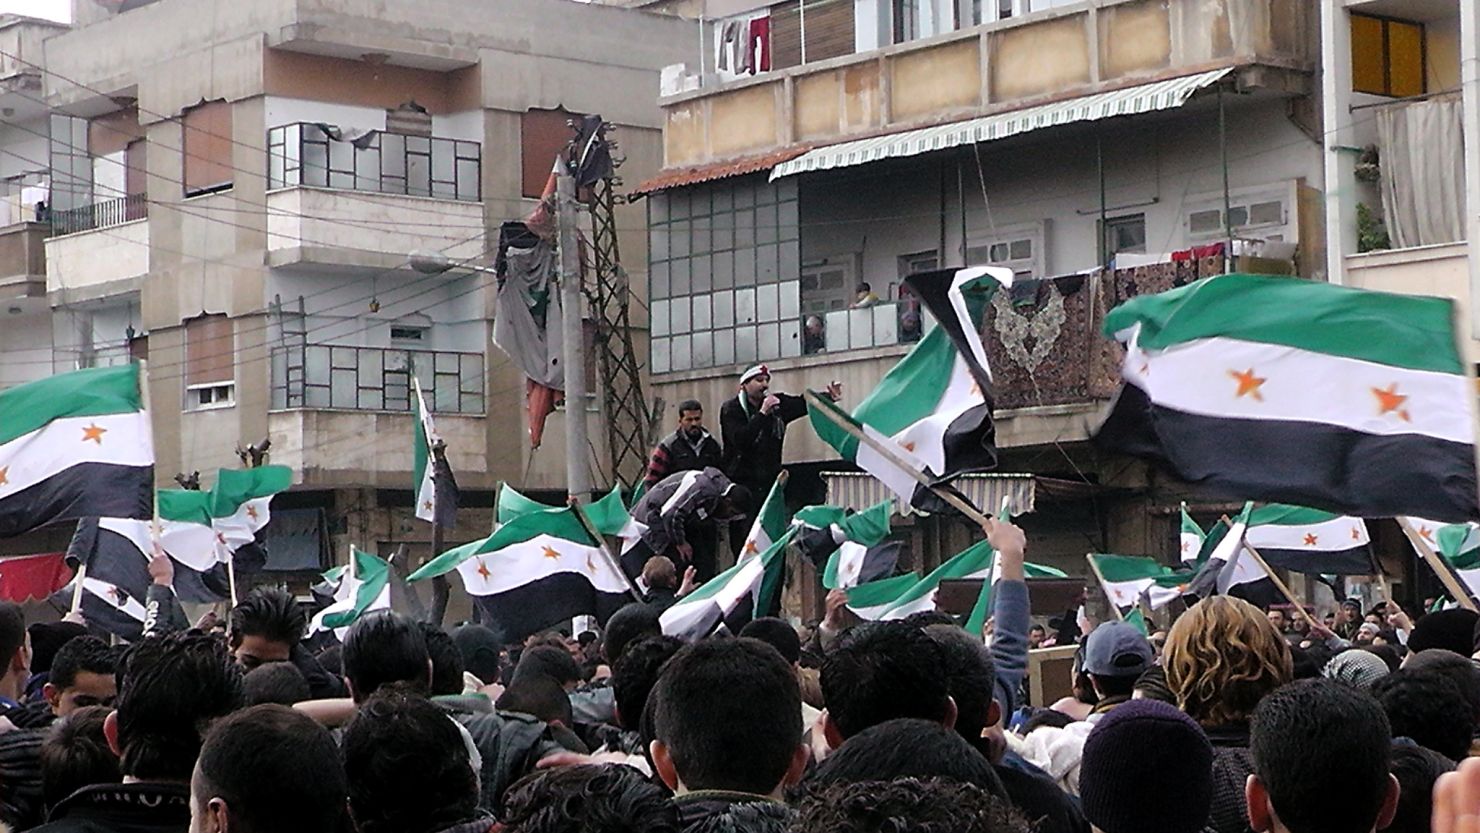 Syrian anti-regime demonstrators wave flags in the Khalidiya neighbourhood of the flashpoint city of Homs on January 20, 2012.